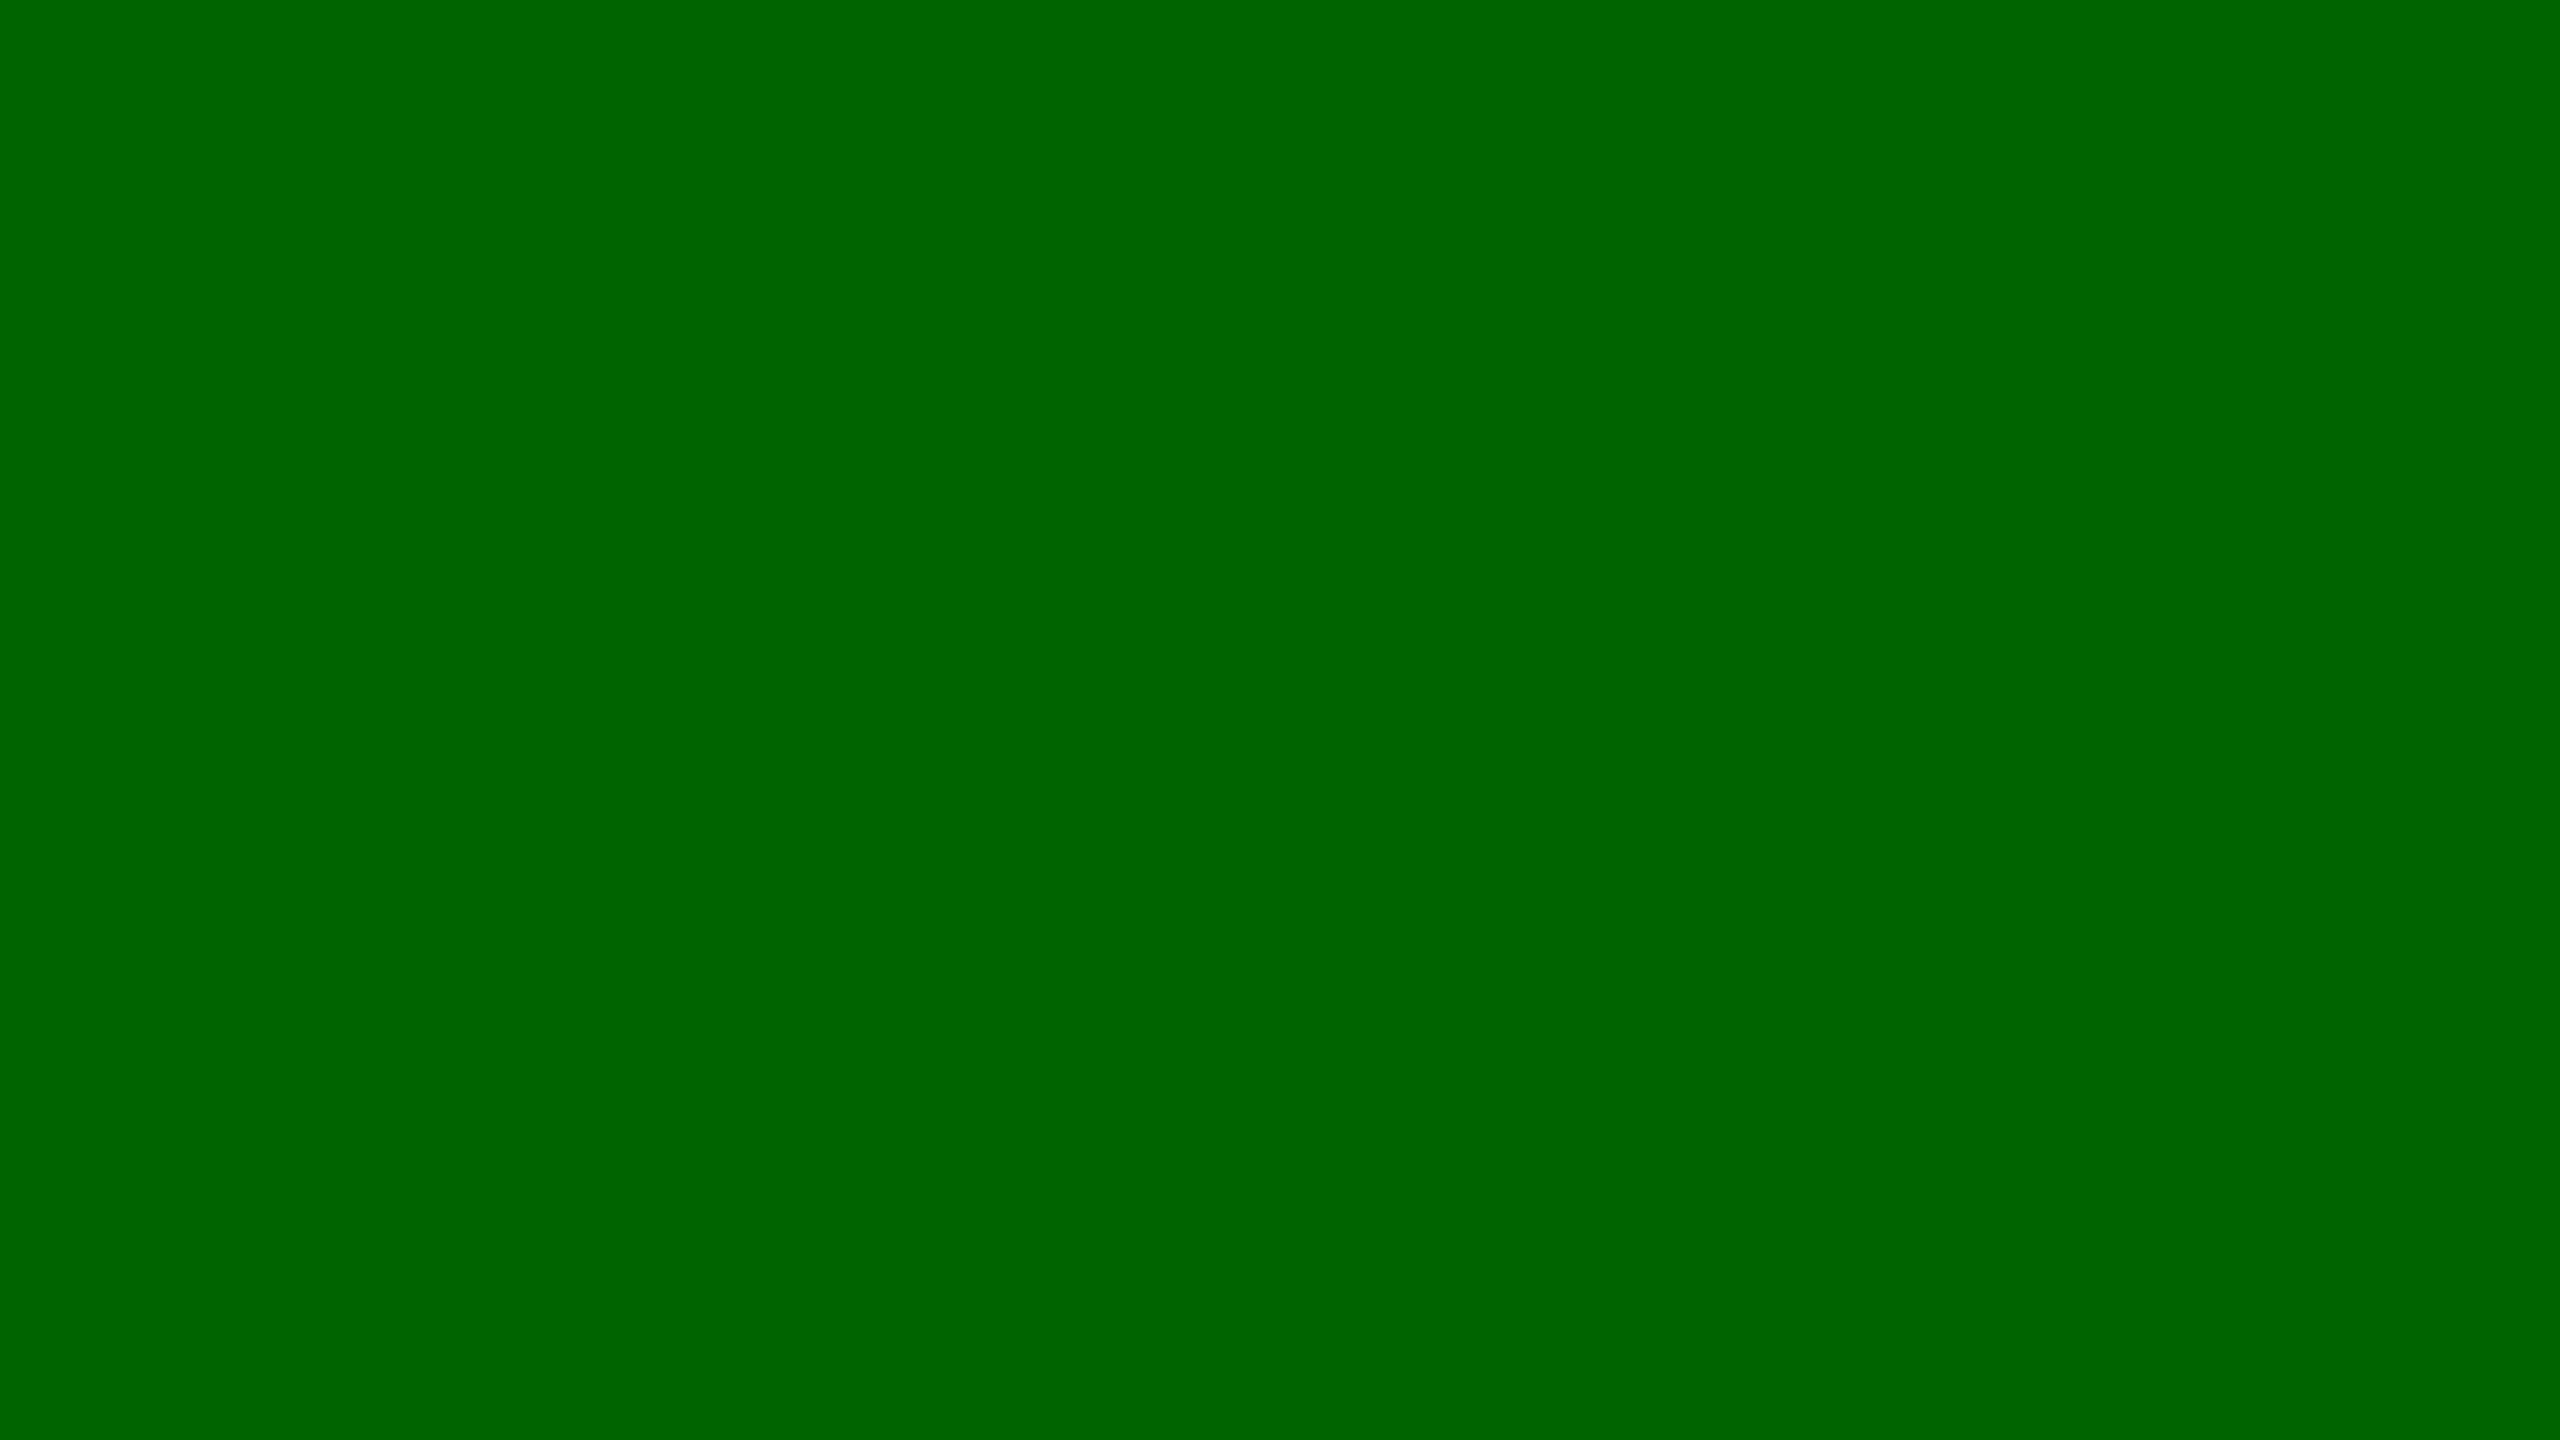 This Darkgreen Desktop Wallpaper Is Easy Just Save The